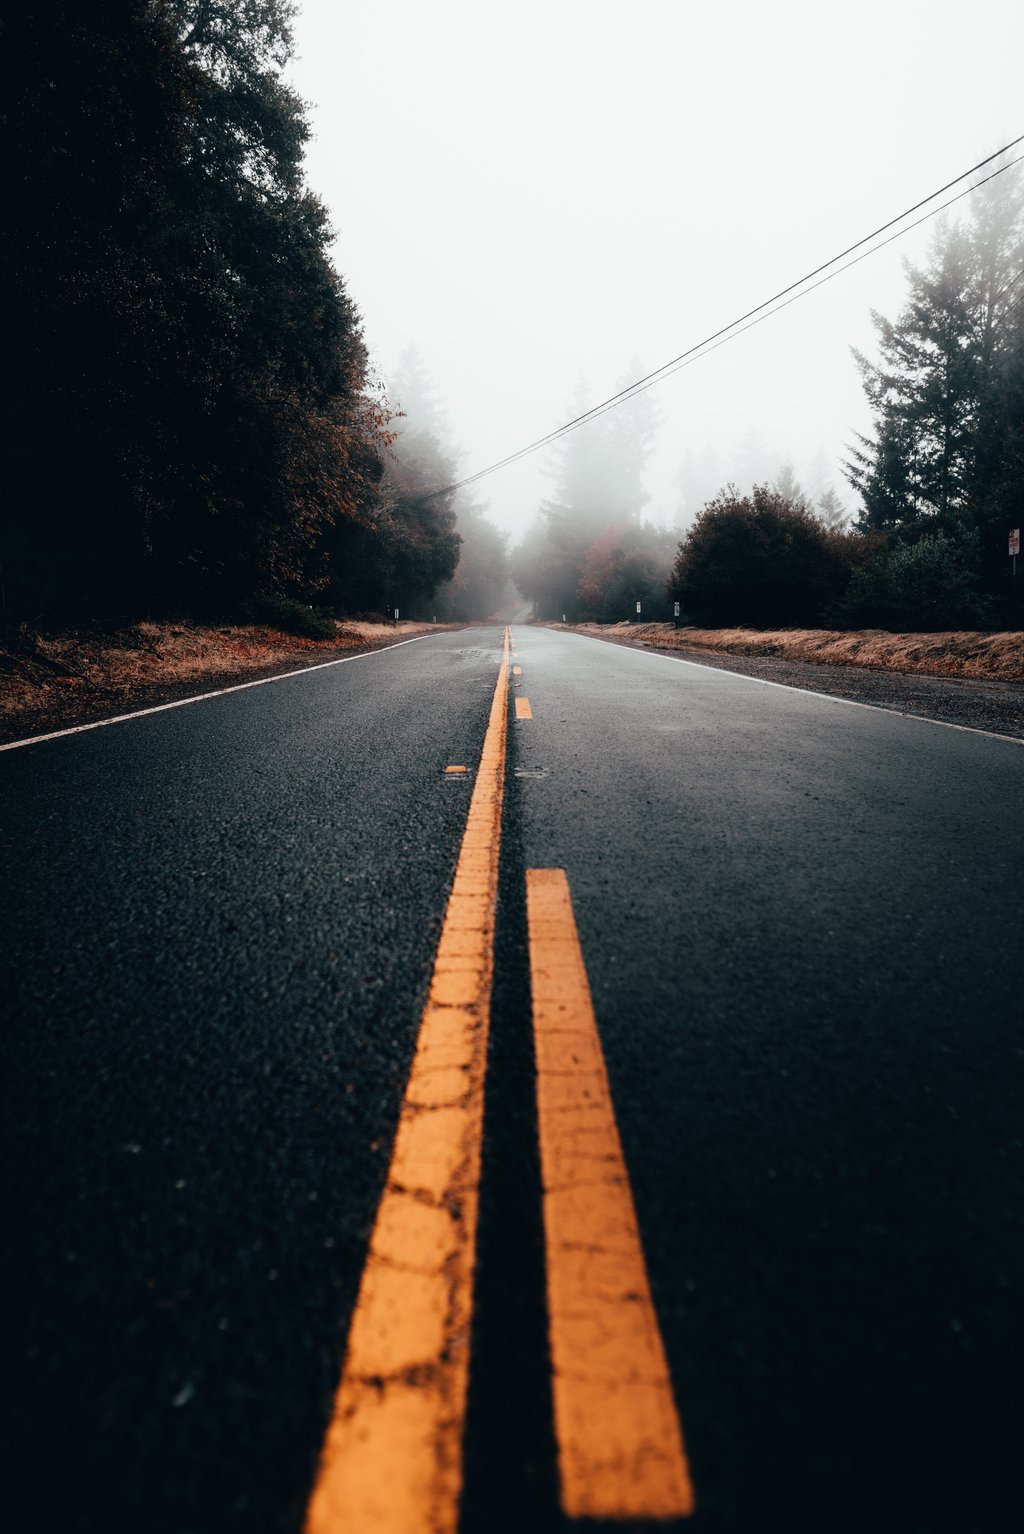 An empty road during daytime with fog in the background